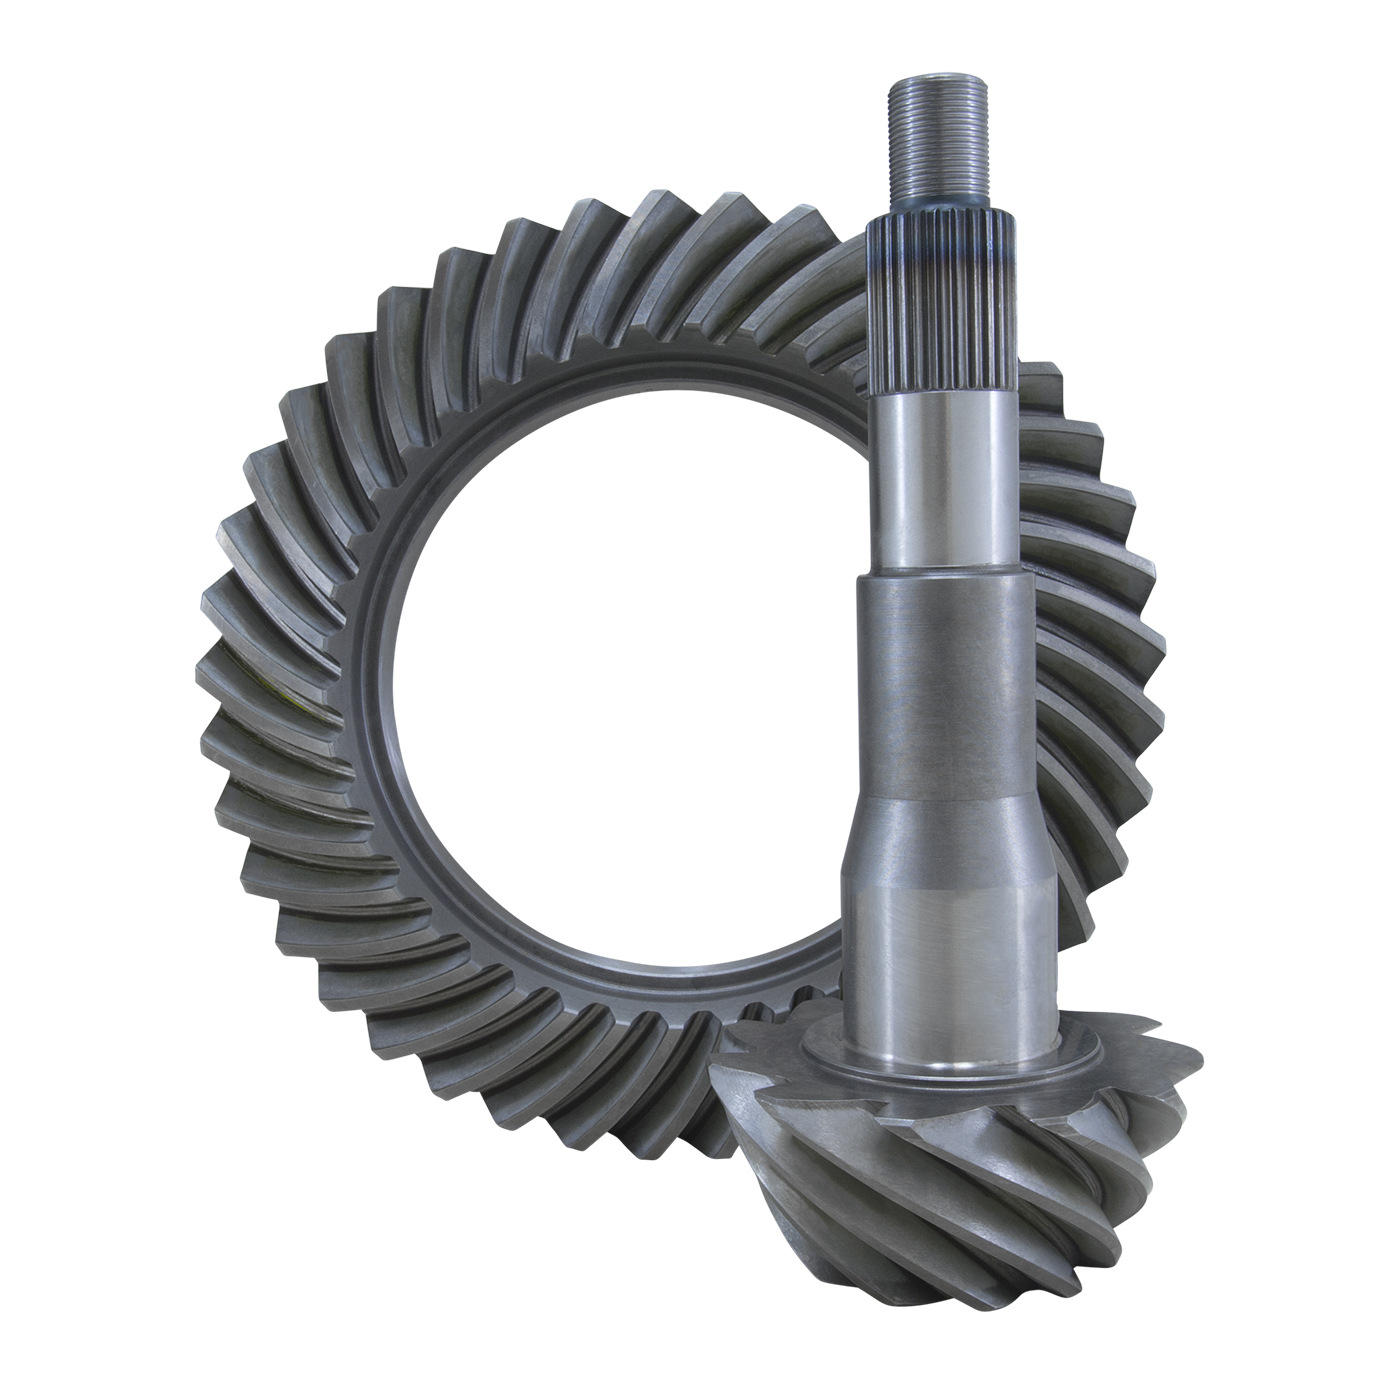 USA Standard 36109 Ring & Pinion Gear Set, For Ford 10.25 in., 4.56 Ratio